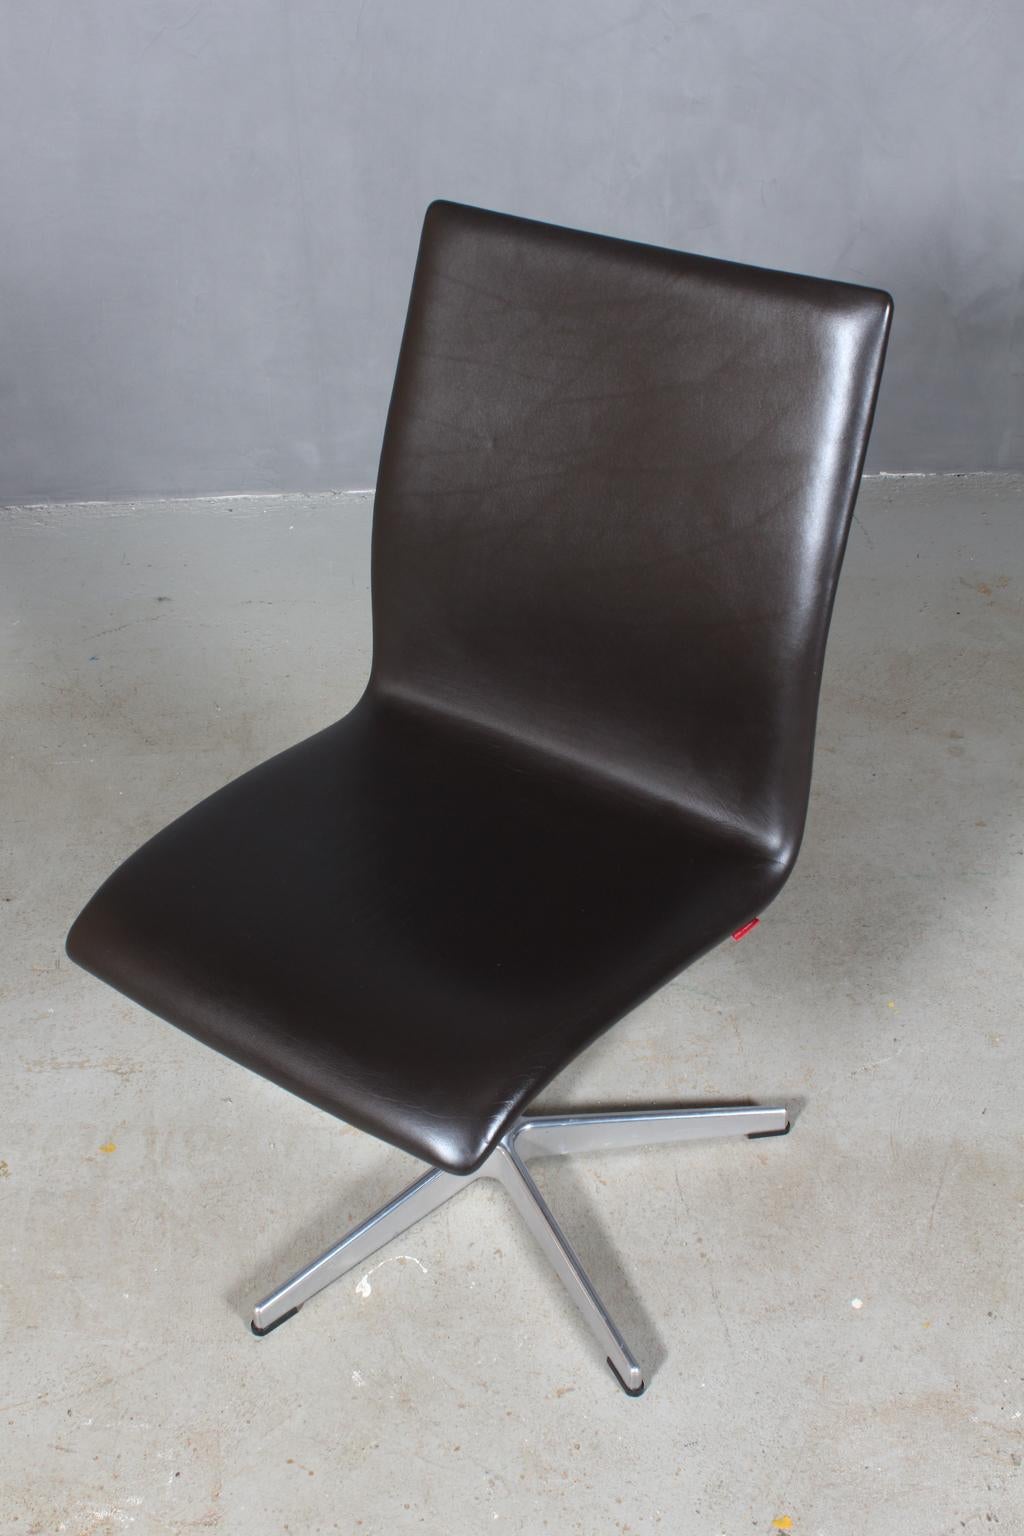 Arne Jacobsen Oxford chair five star base in aluminum. Turnable.

Original mokka leather upholstery

Made by Fritz Hansen in 2006, red label

Original designed for the Oxford university.